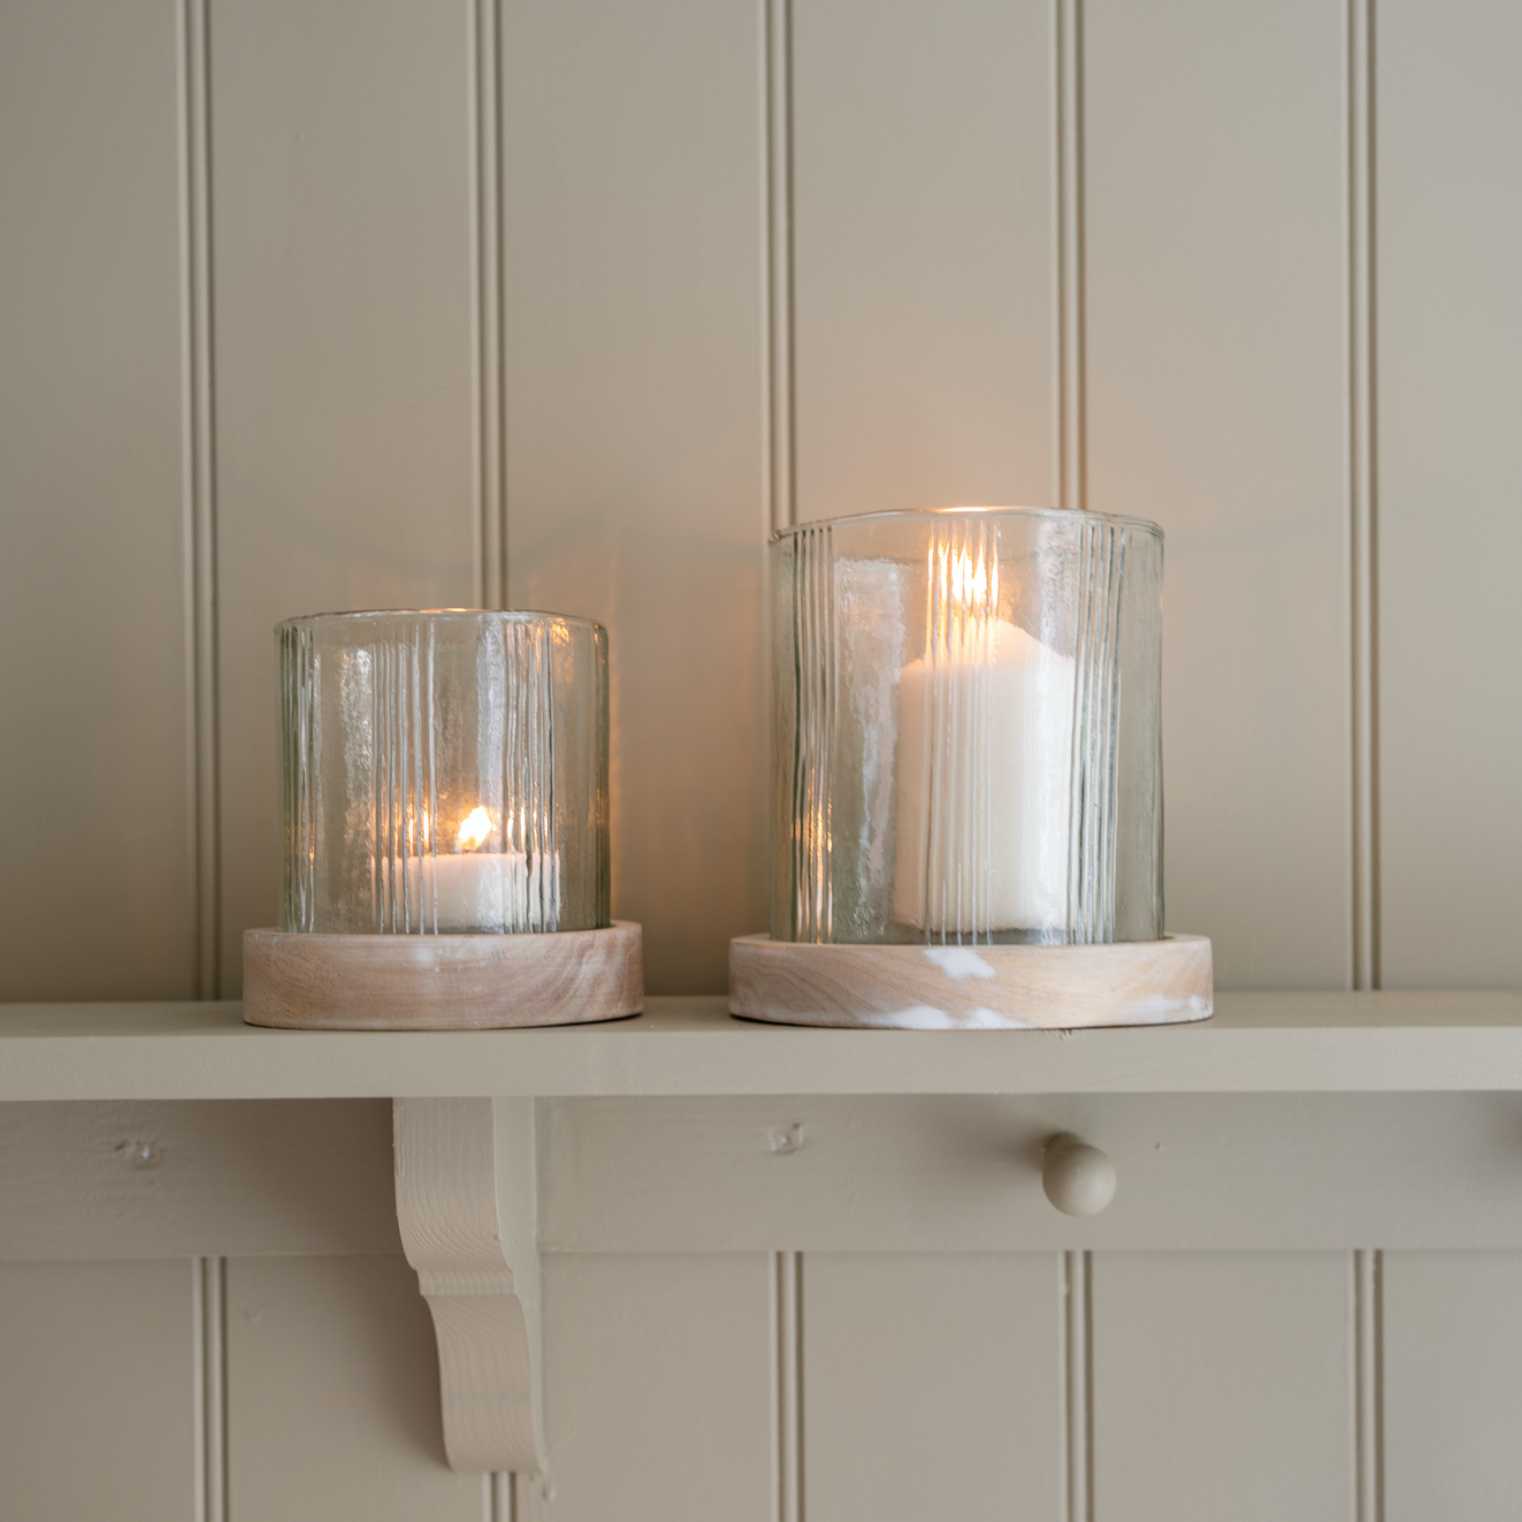 A set of two rustic glass candle holder against a panelled wall.